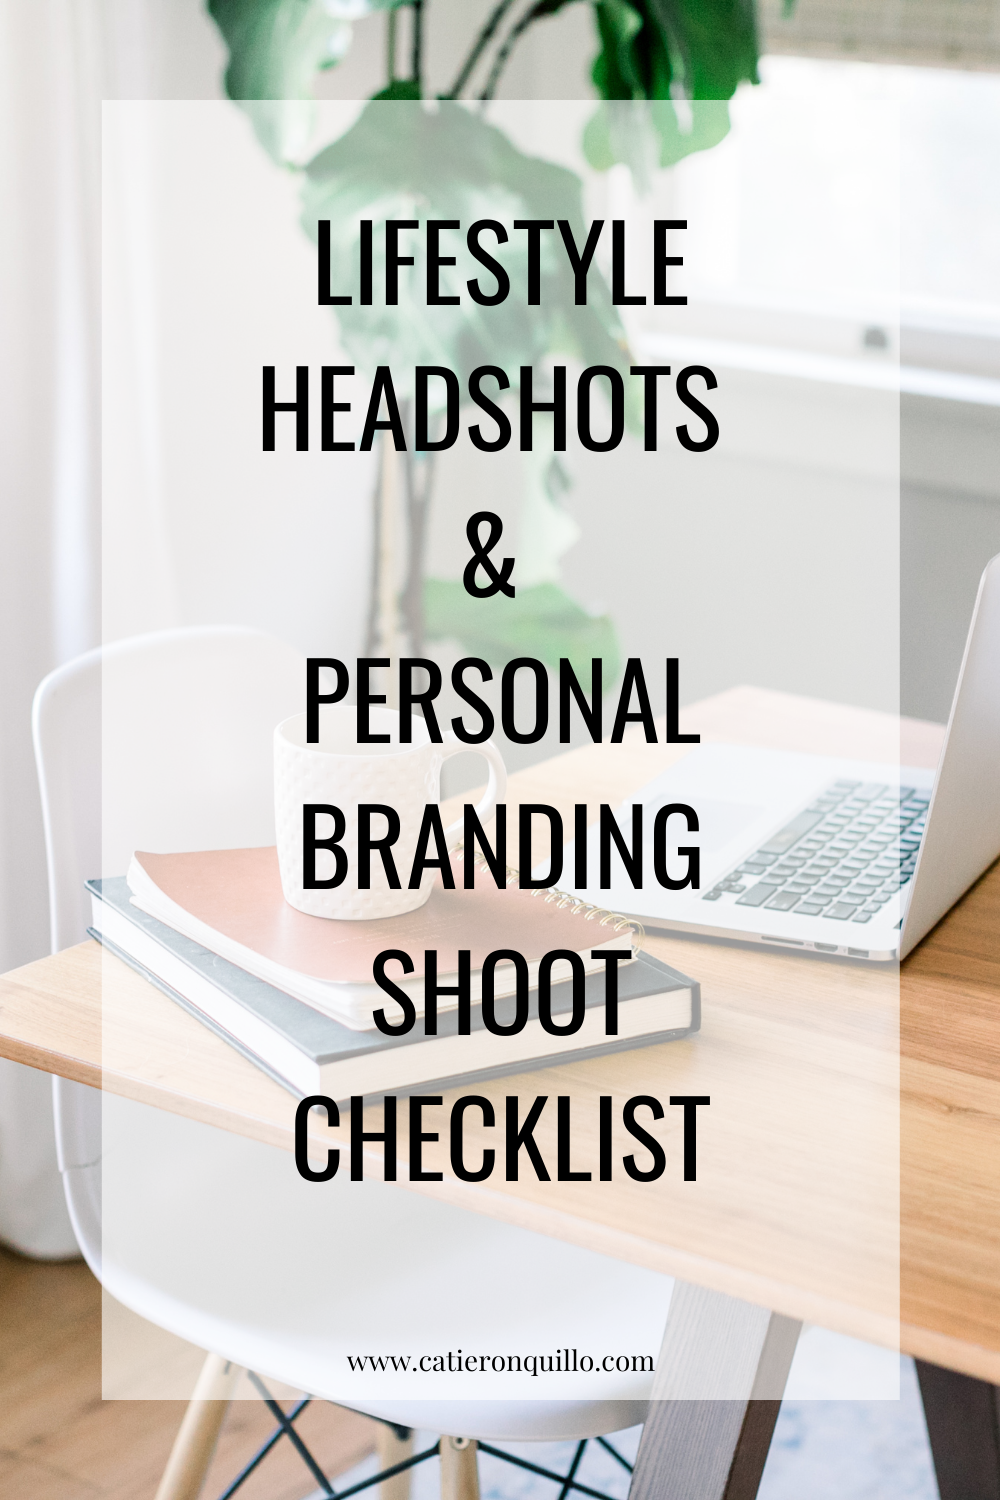 Lifestyle Headshots and Personal Branding Checklist